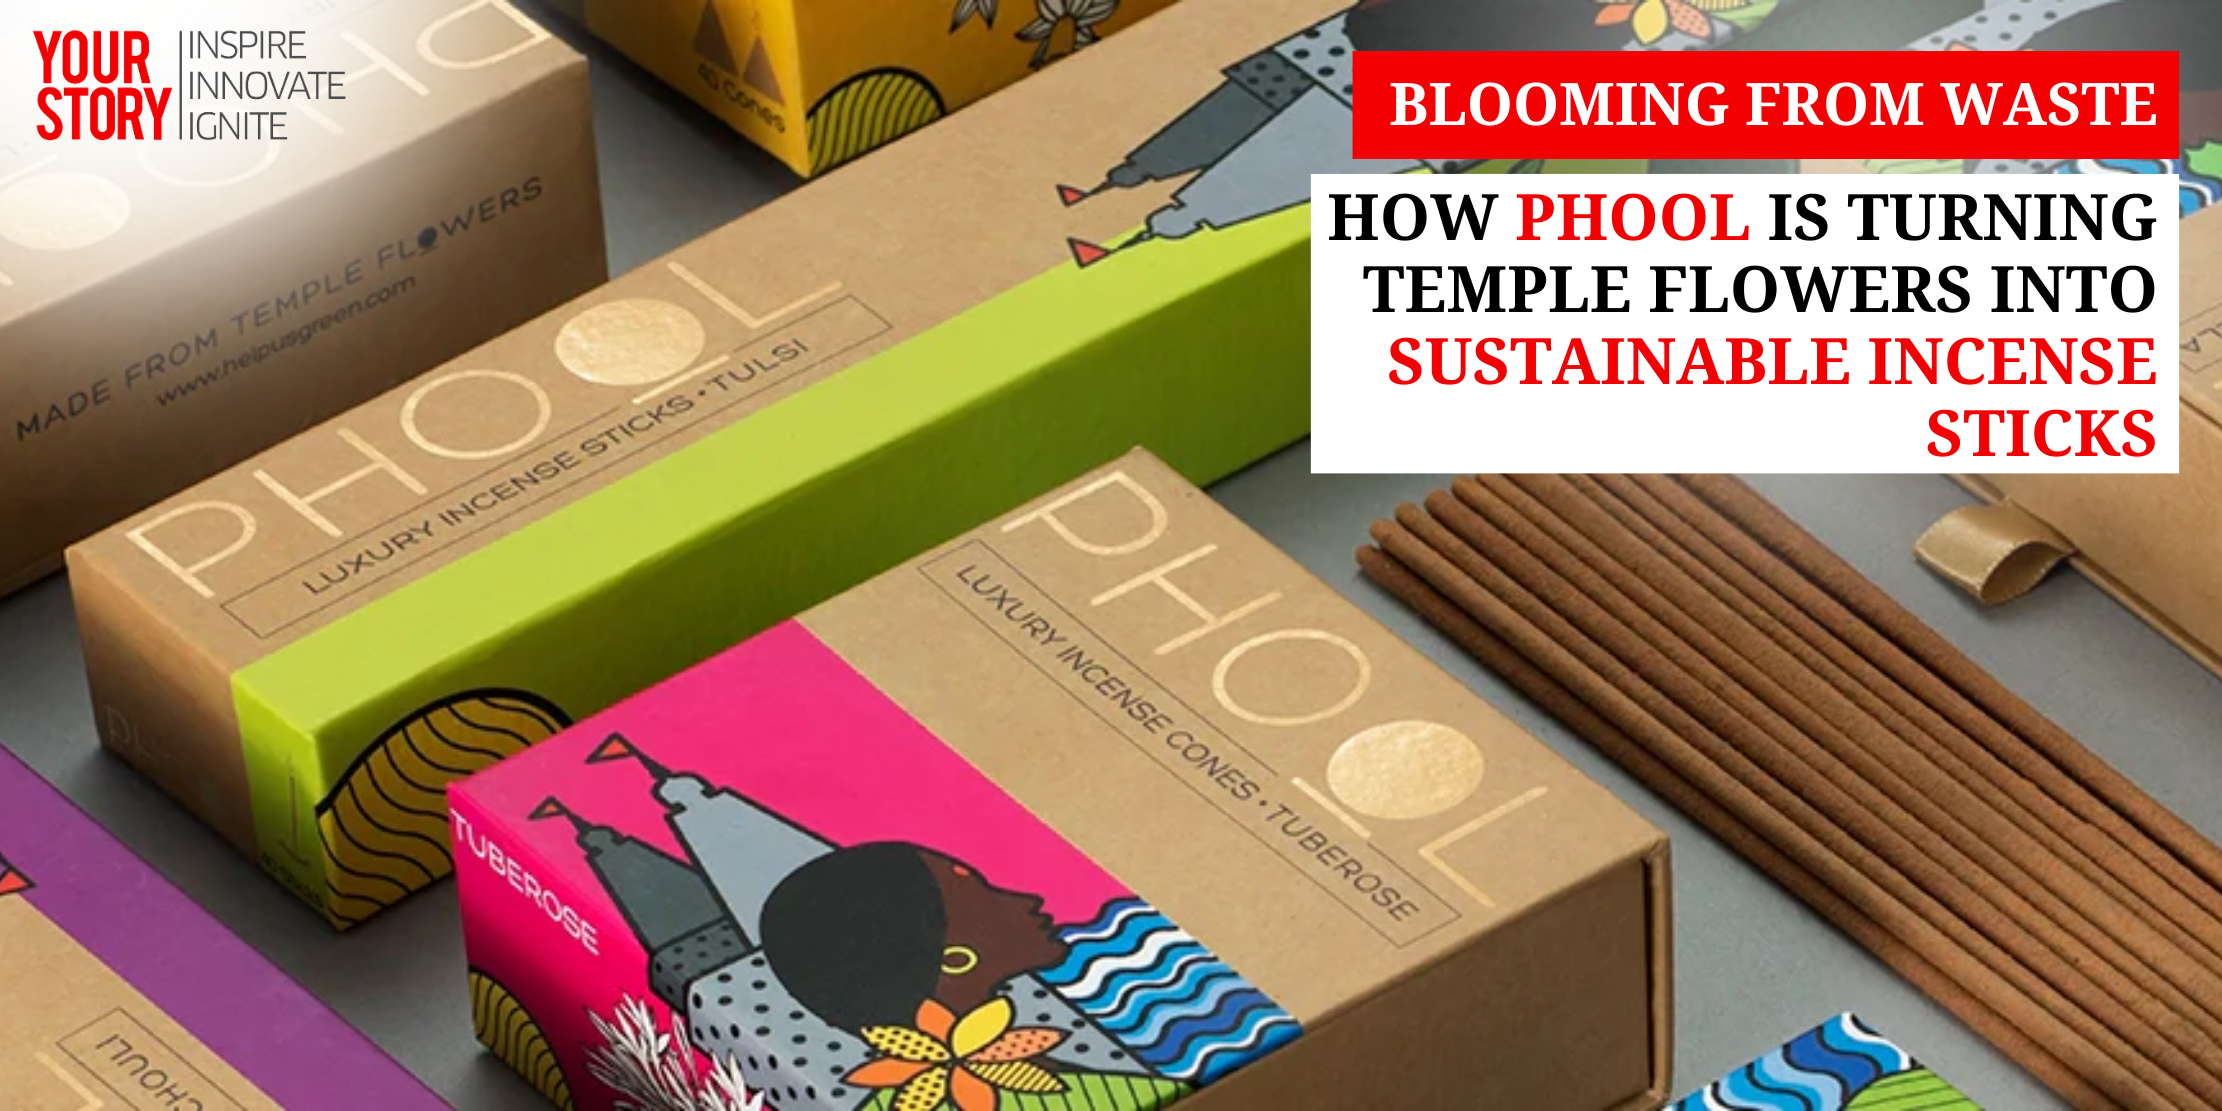 Blooming from Waste: How Phool is Turning Temple Flowers into Sustainable Incense Sticks